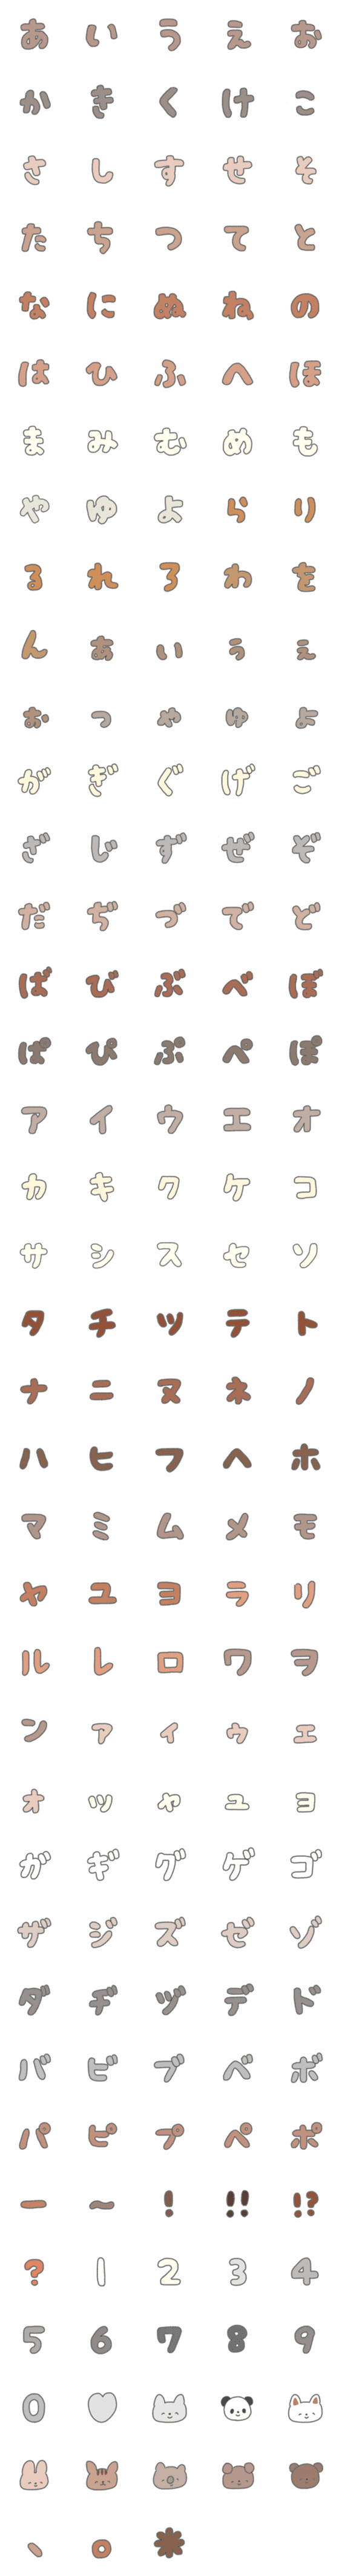 [LINE絵文字]たのしそう（文字と絵文字）の画像一覧